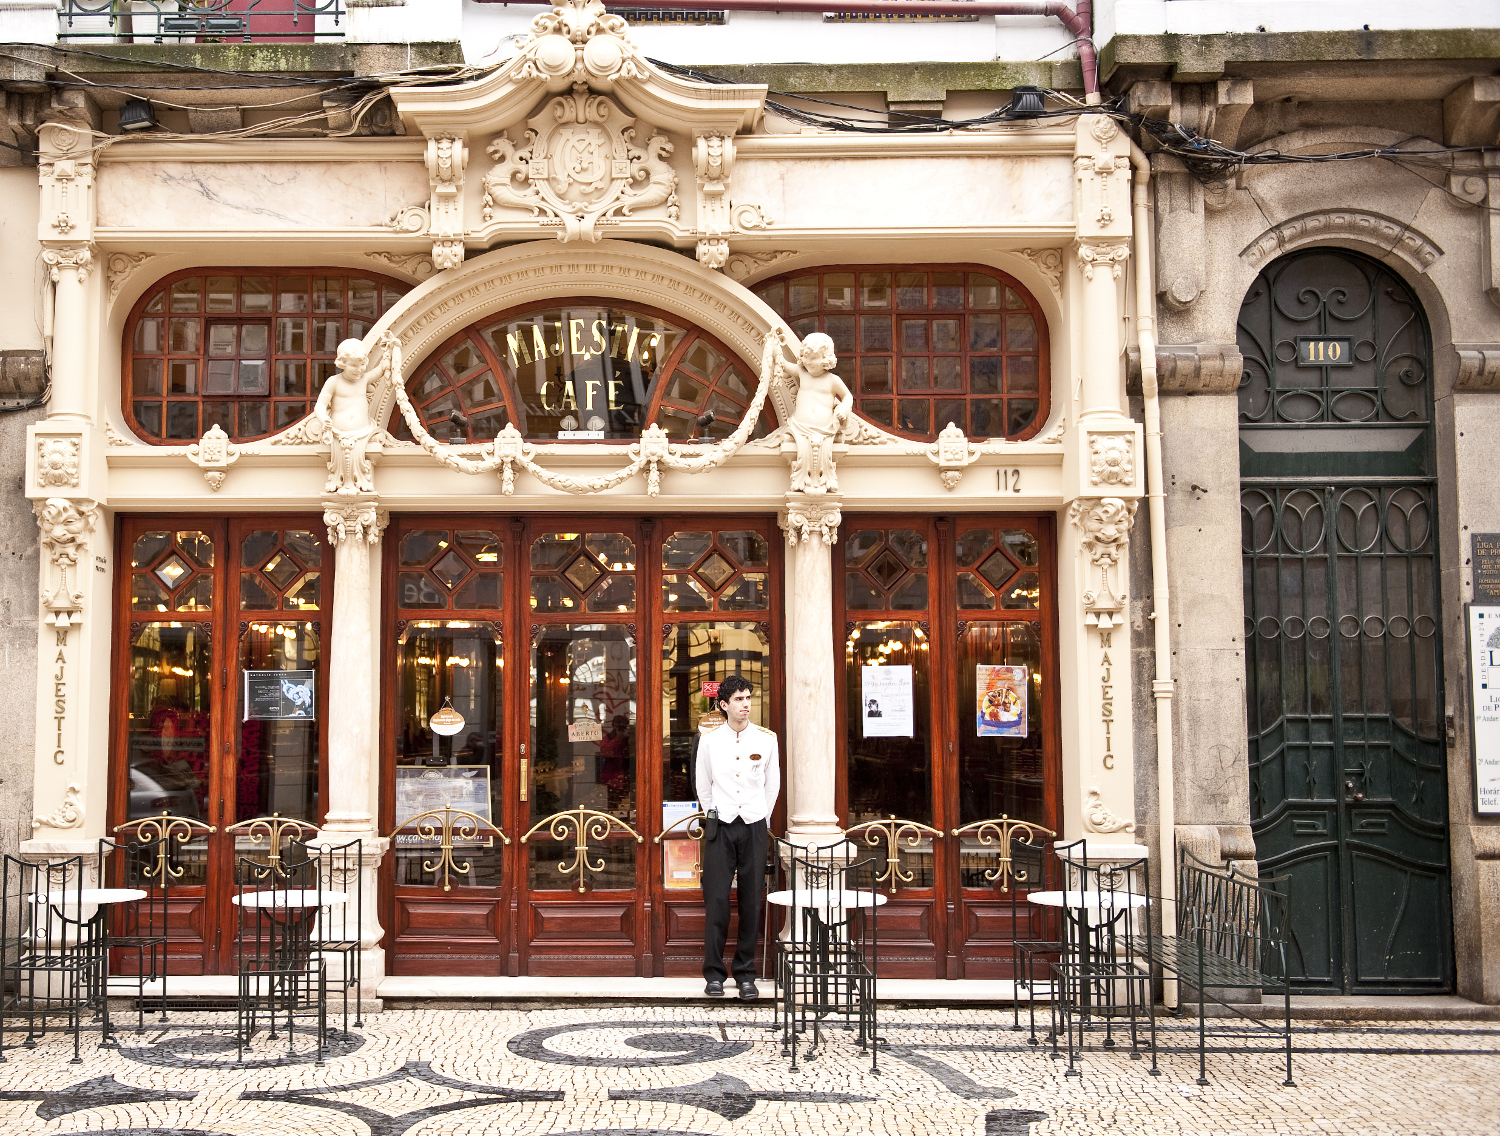 Make a pit-stop at Café Majestic for guaranteed glamour. Image by Maremagnum / Photolibrary / Getty